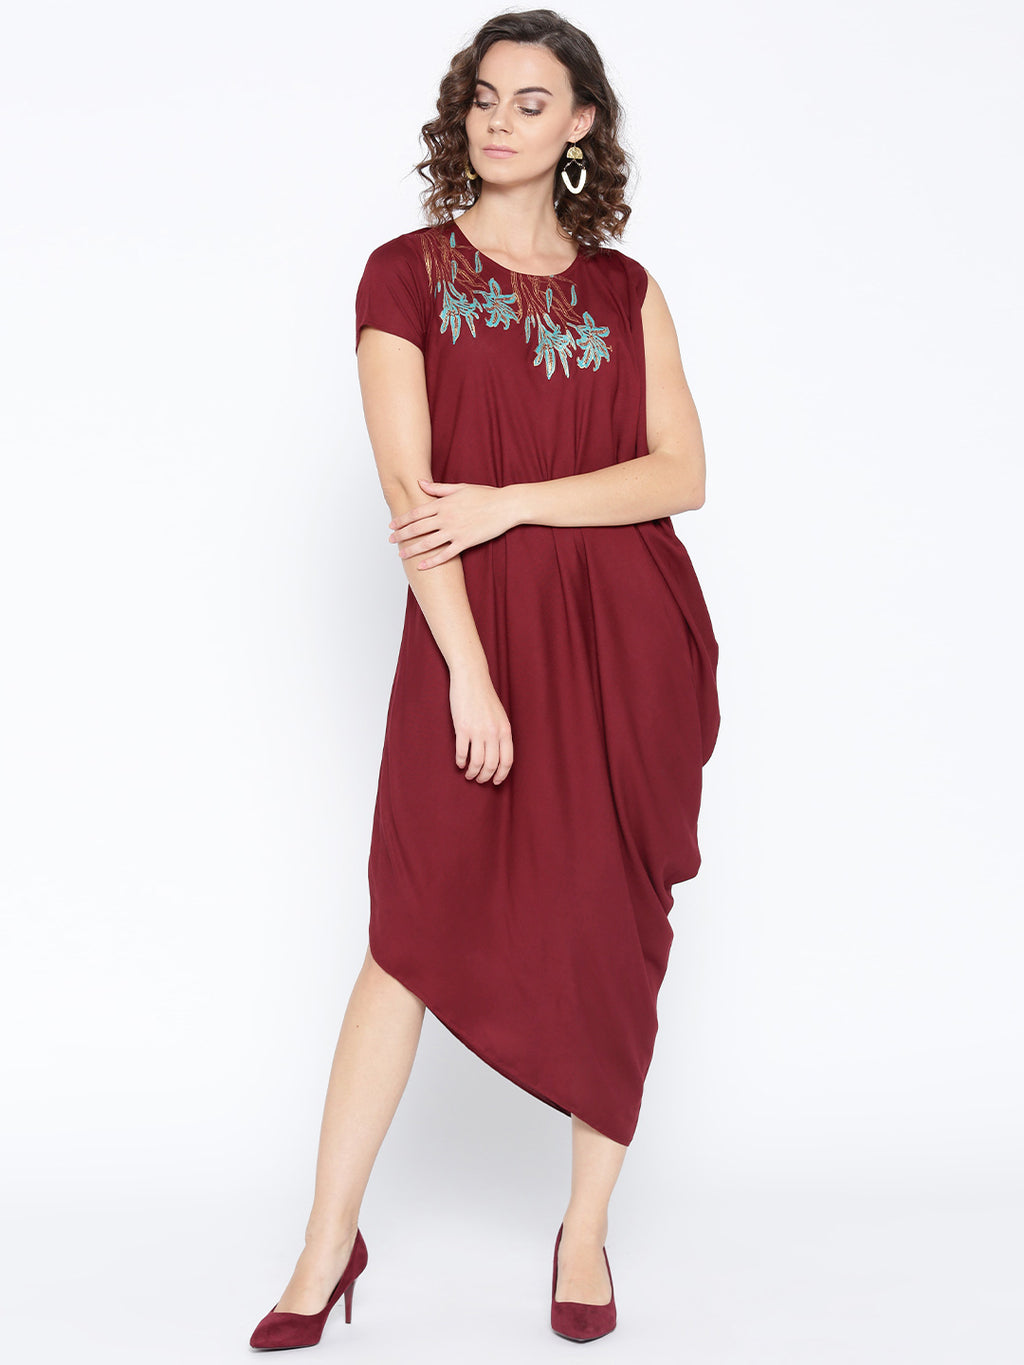 One side cowl asymettric dress with side floral print in Maroon